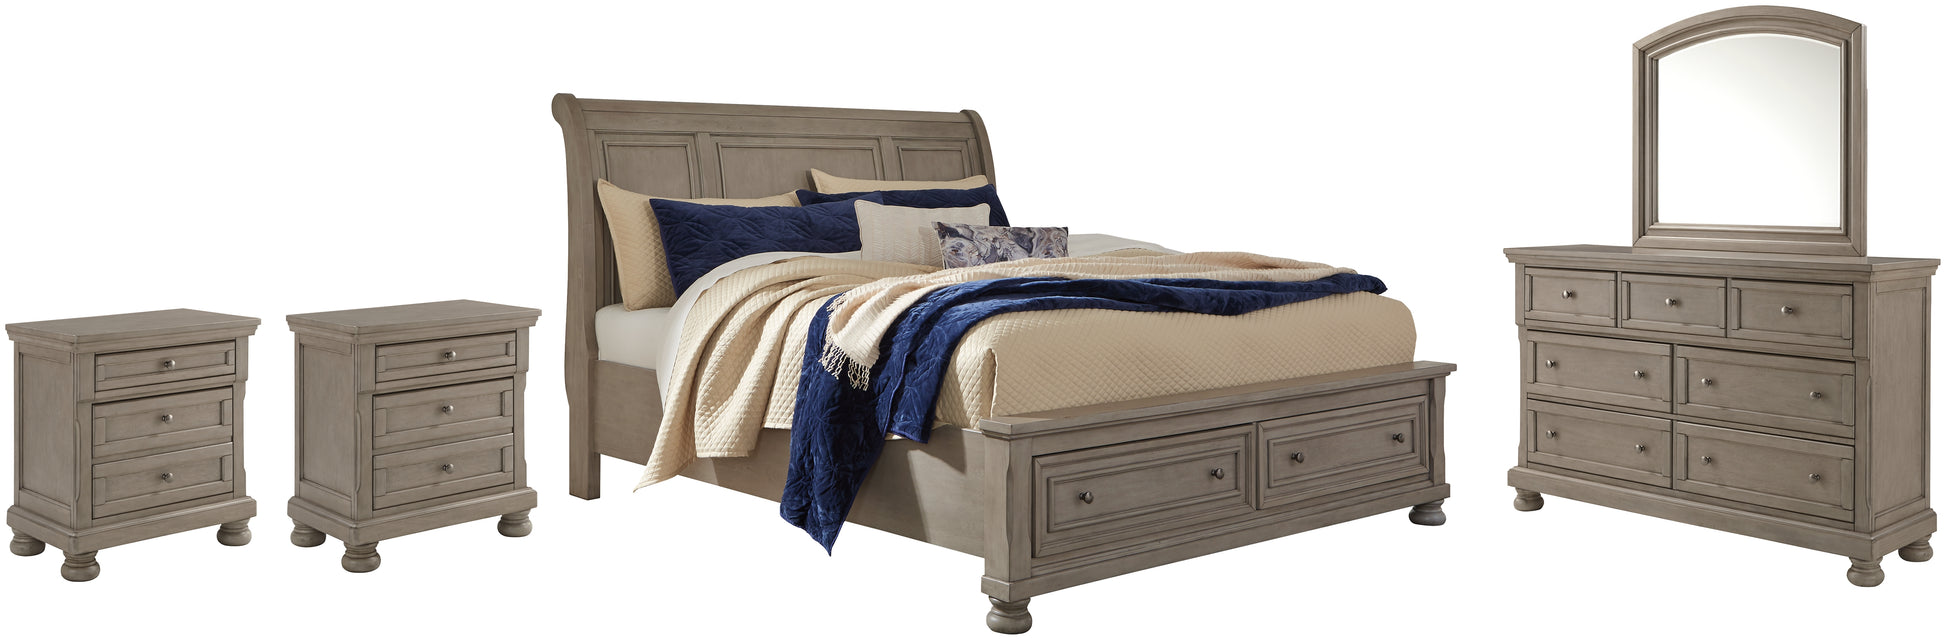 Lettner King Sleigh Bed with 2 Storage Drawers with Mirrored Dresser and 2 Nightstands Wilson Furniture (OH)  in Bridgeport, Ohio. Serving Bridgeport, Yorkville, Bellaire, & Avondale